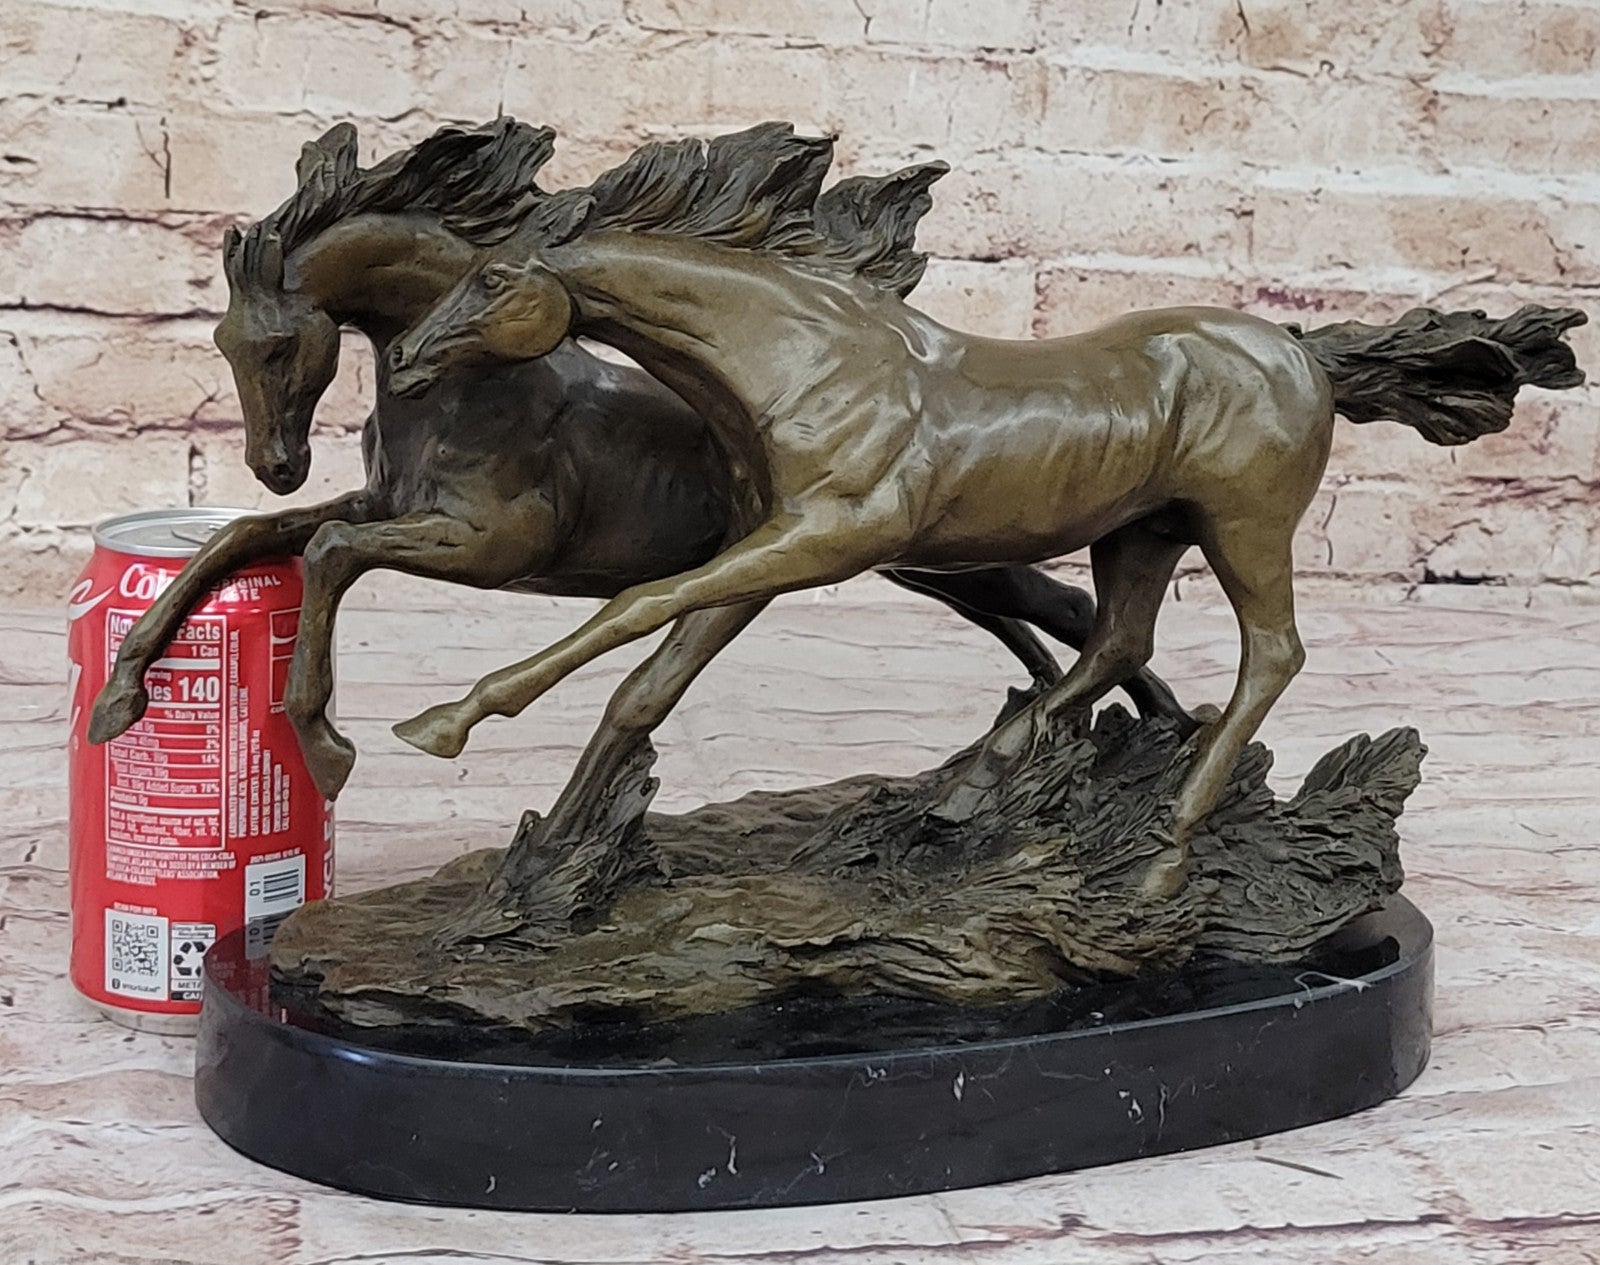 Signed Original B.C. Zhang: Two Large Stallions Bronze Sculpture, Handcrafted Artwork